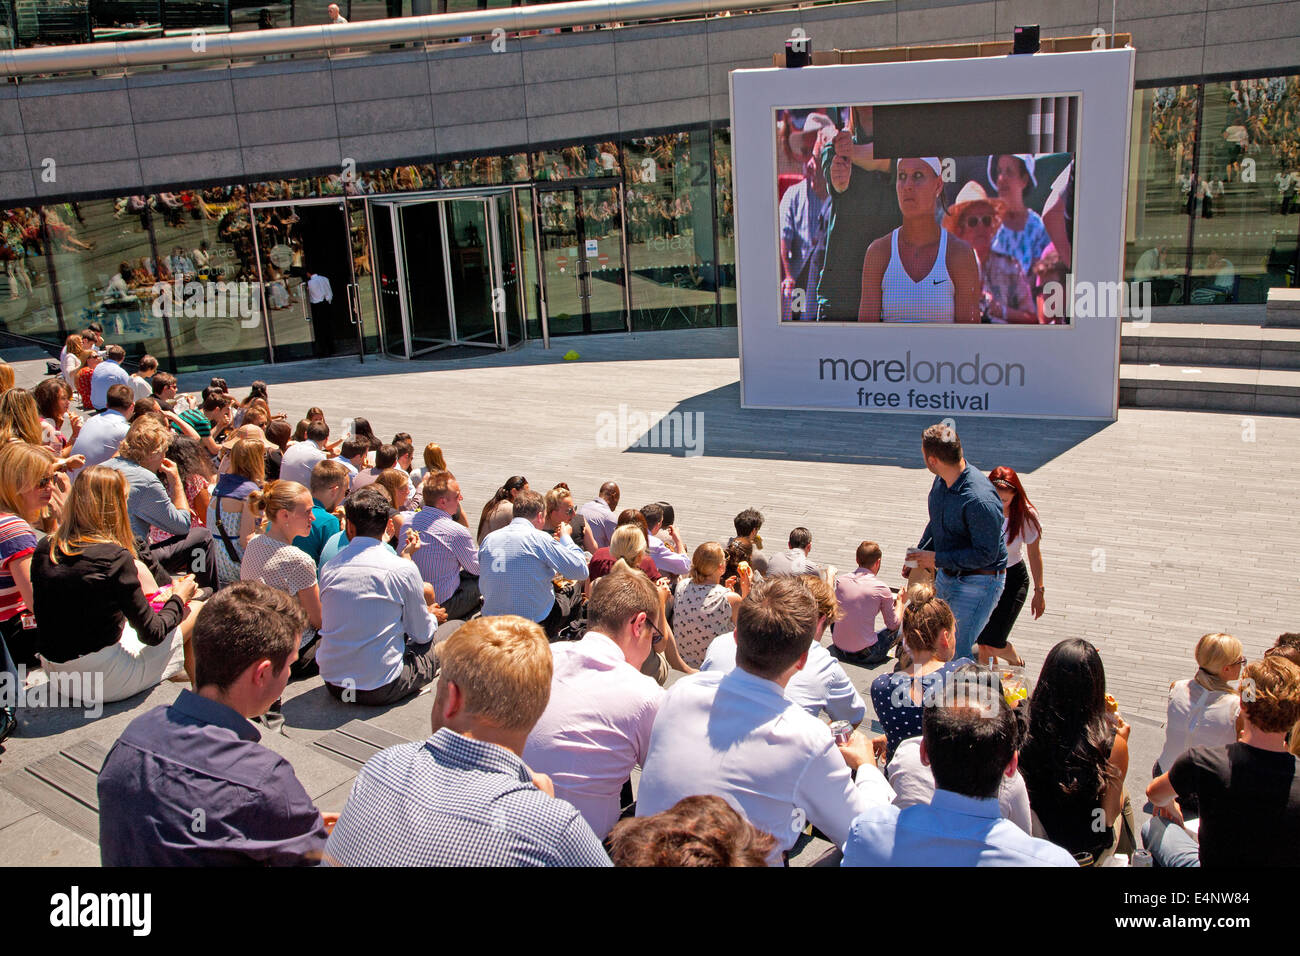 Wimbledon fans gather to watch live tennis on a giant LCD screen as part of the More London free festival,Centre Court,London,UK Stock Photo